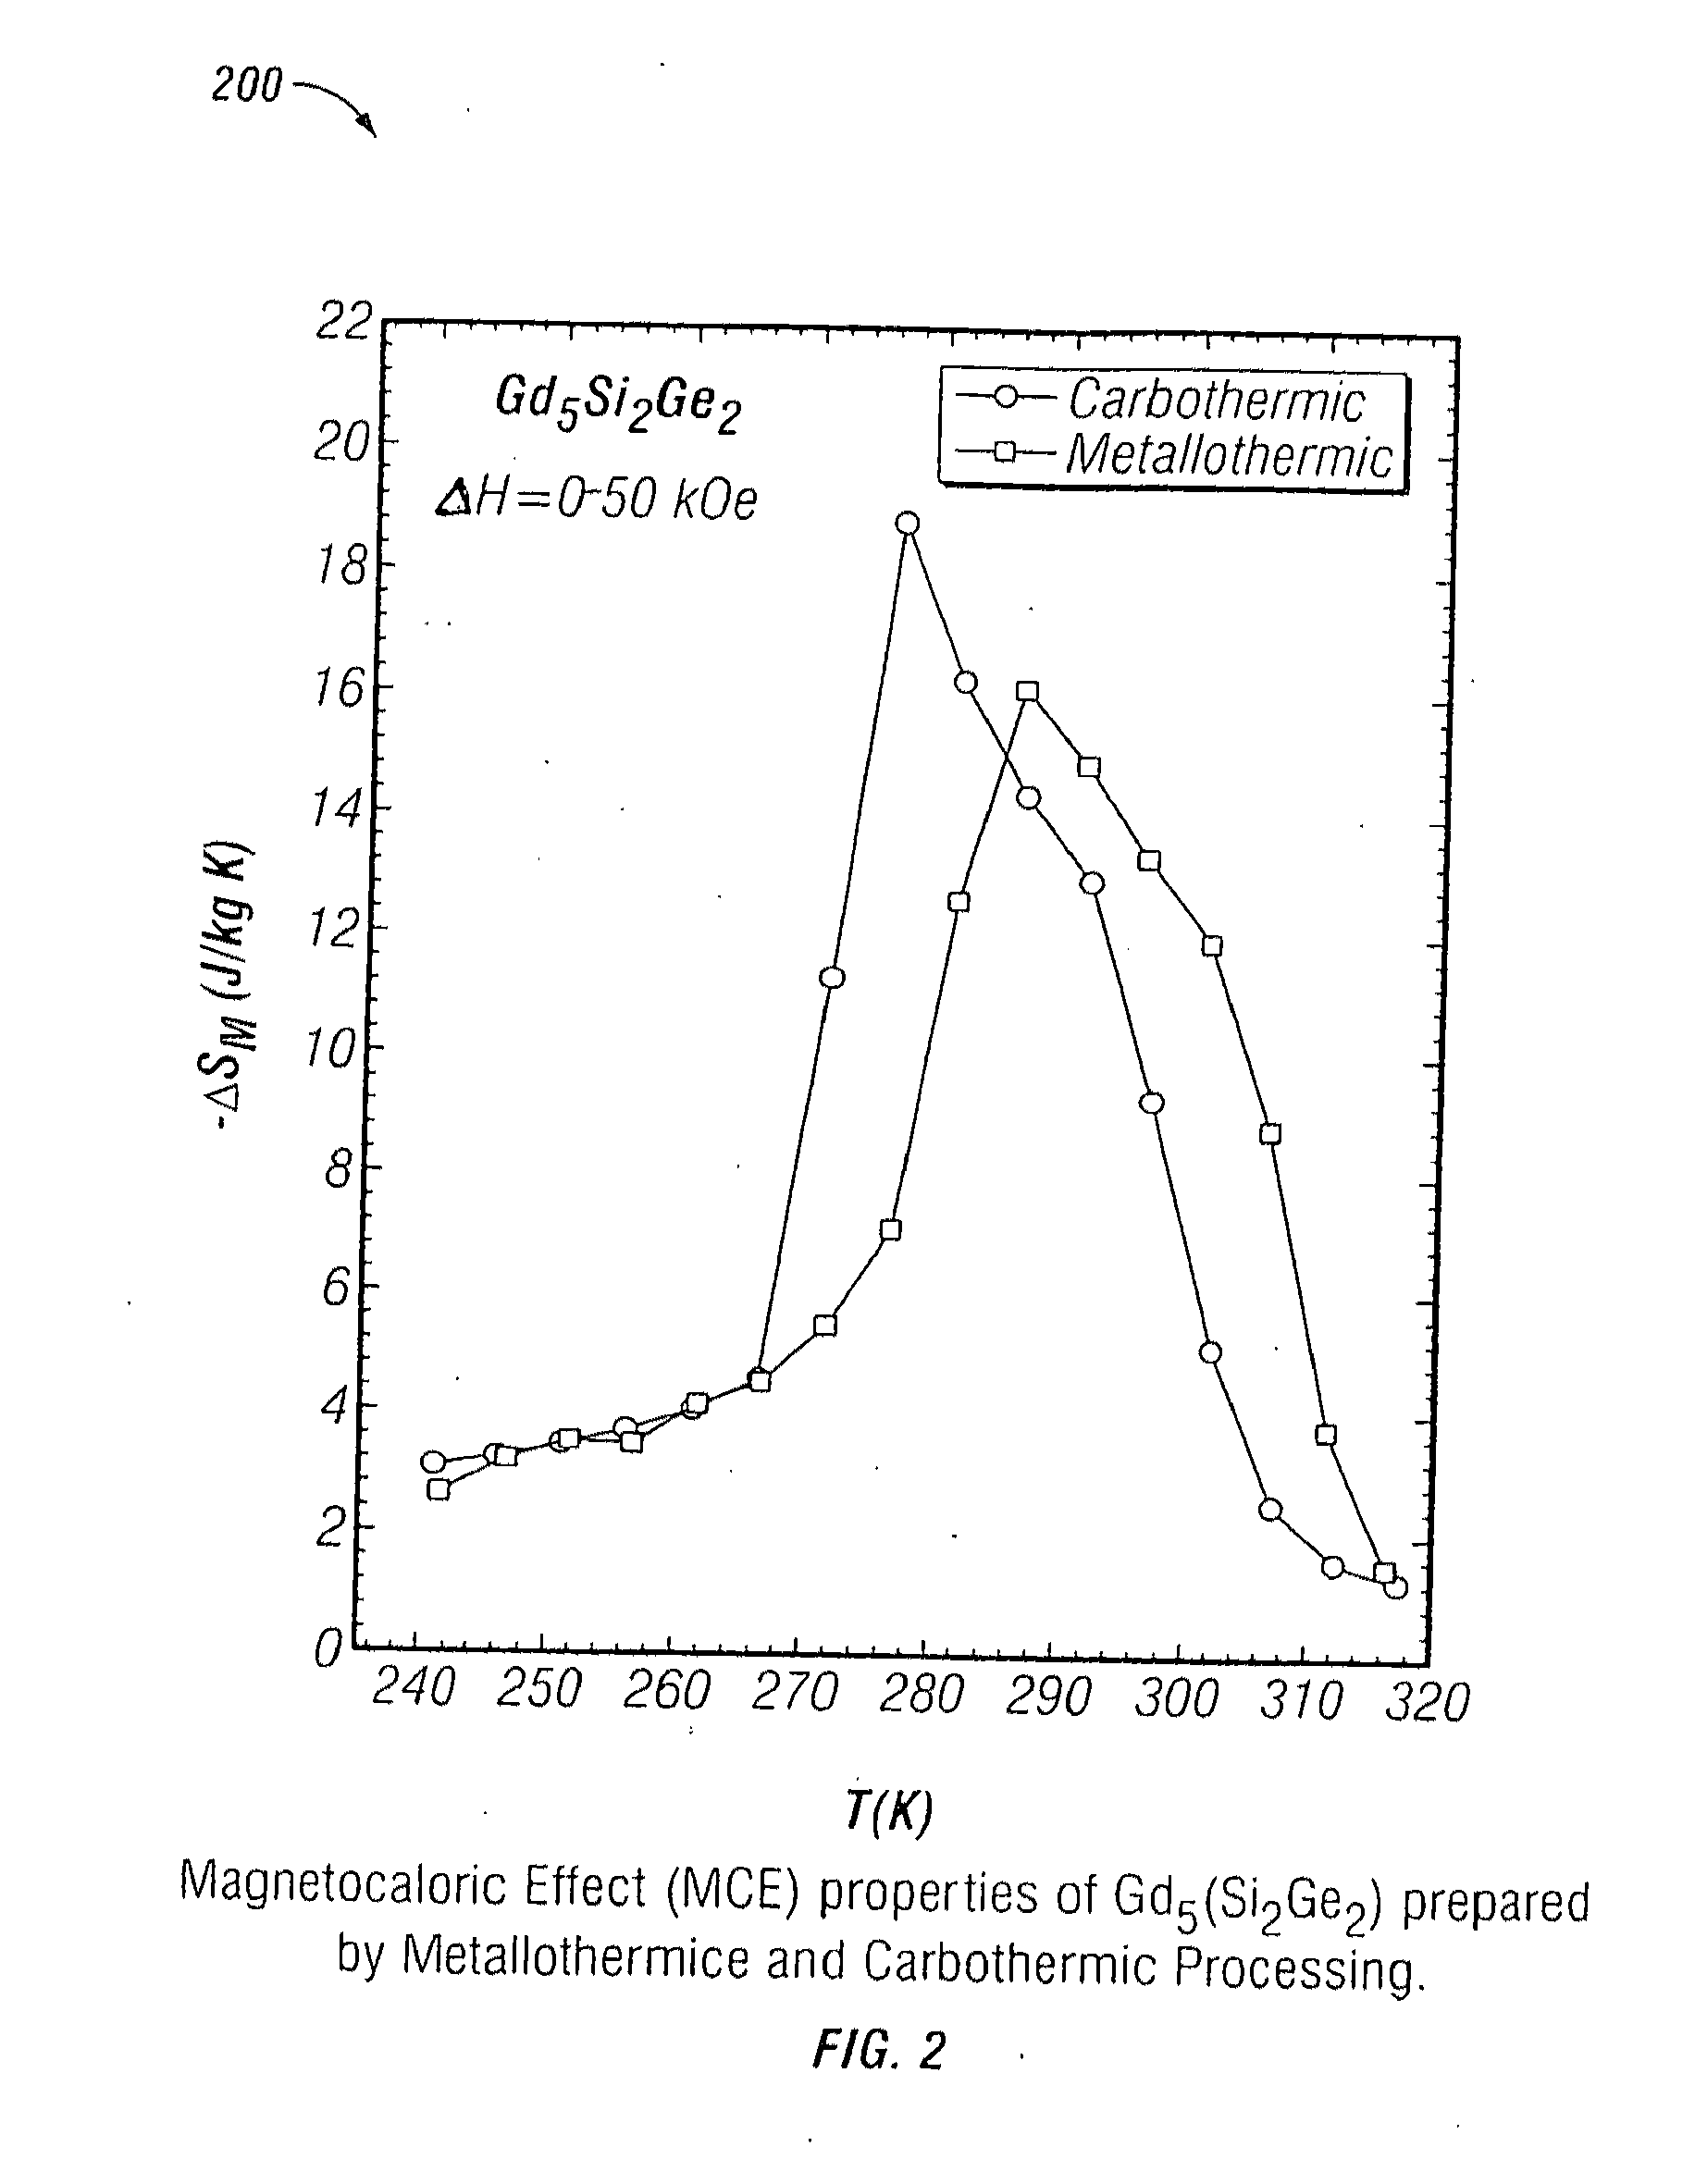 Preparation of R5X4 materials by carbothermic processing